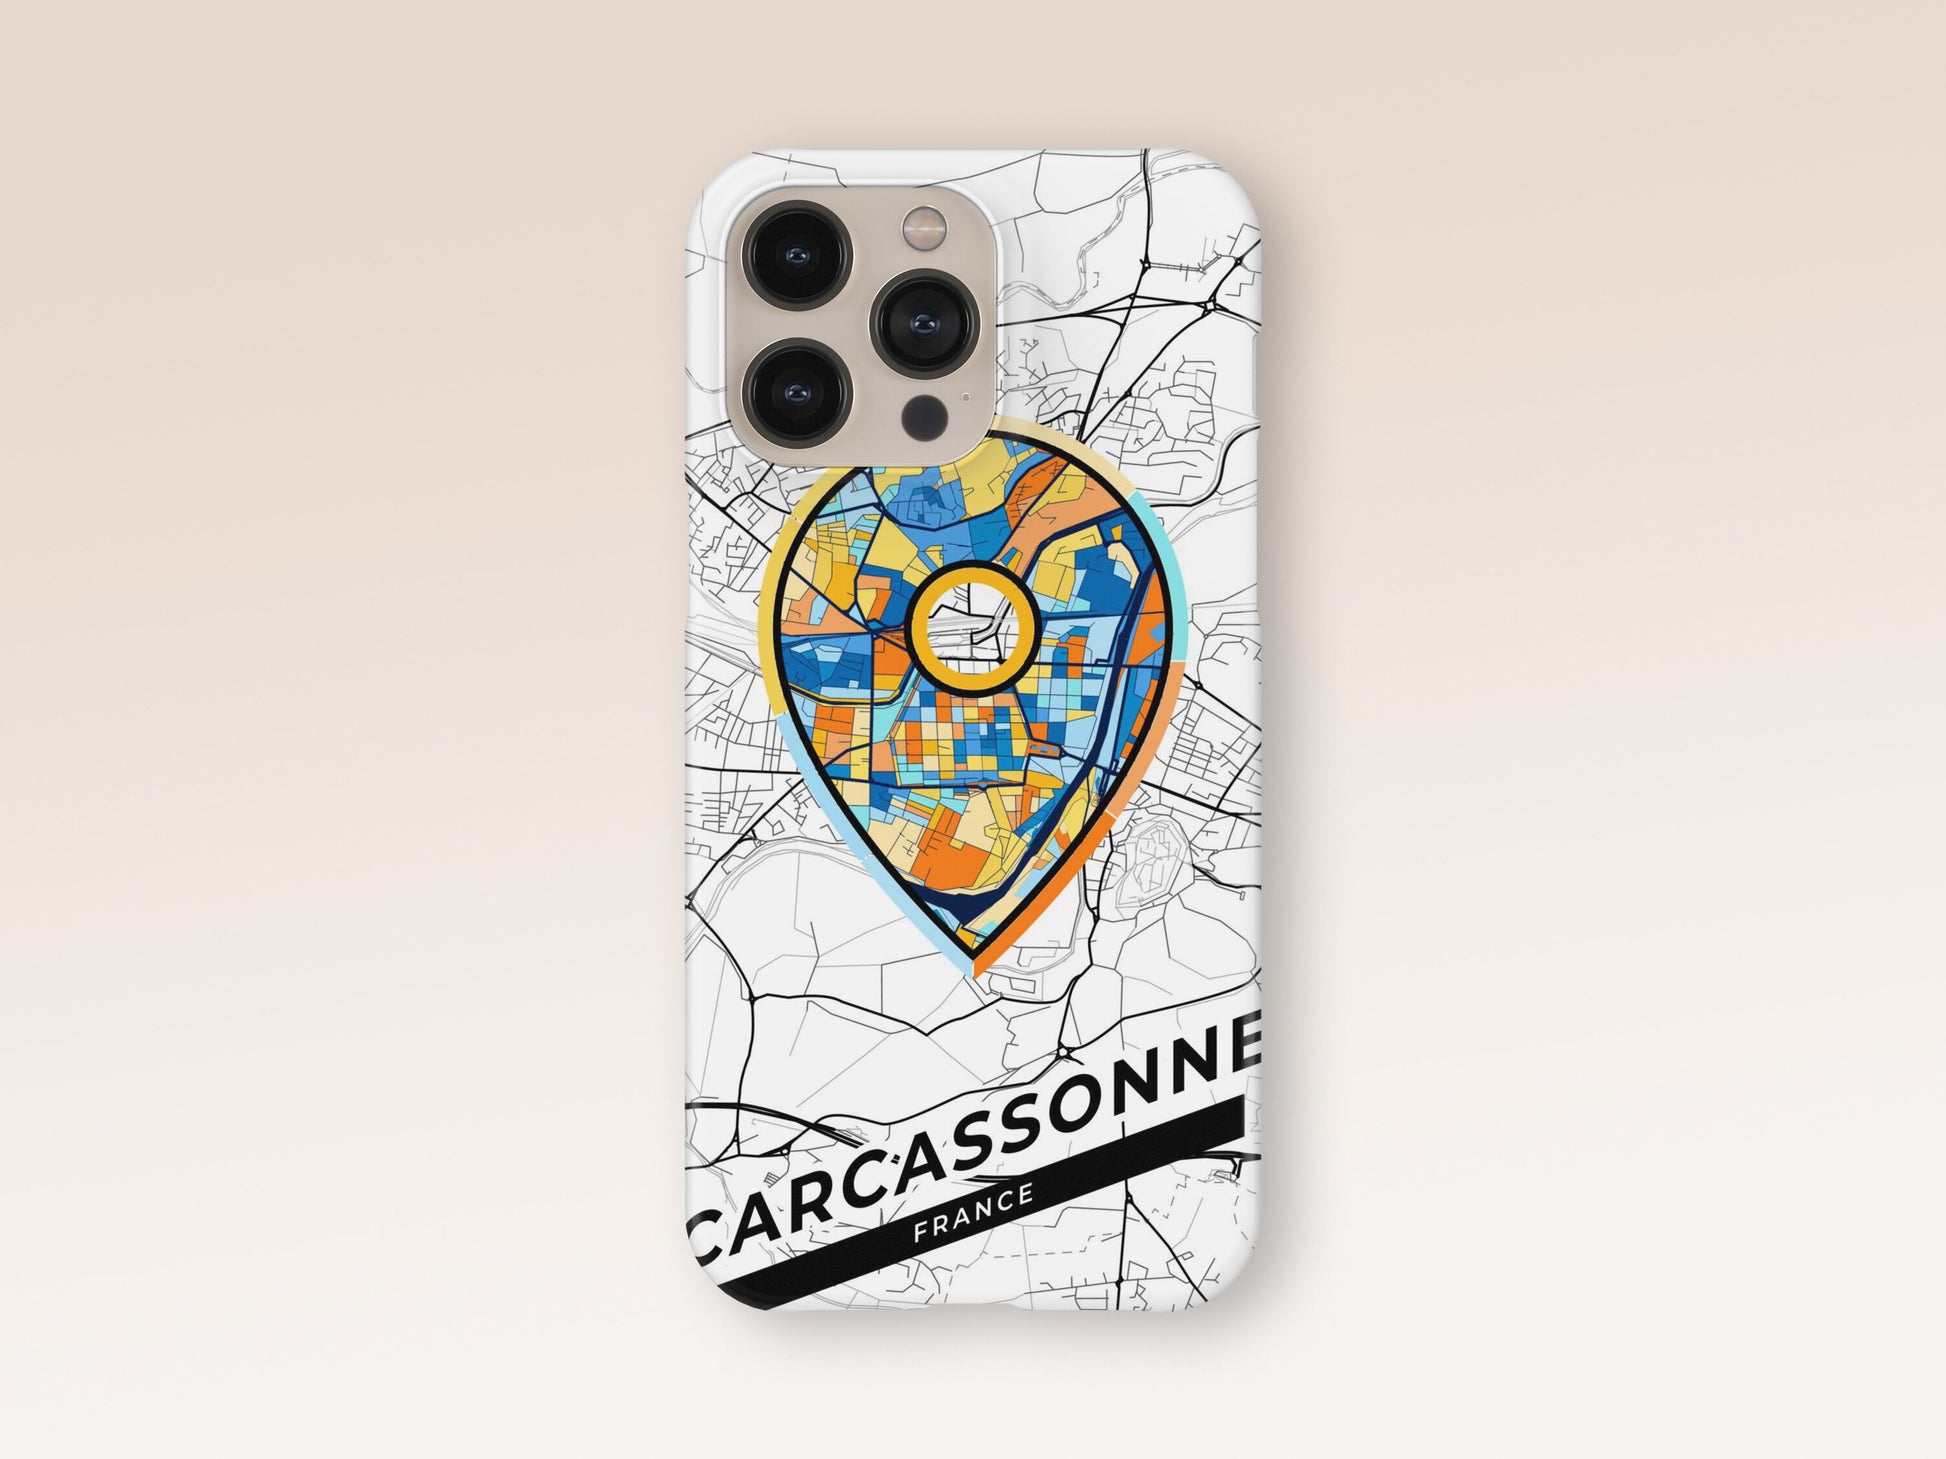 Carcassonne France slim phone case with colorful icon. Birthday, wedding or housewarming gift. Couple match cases. 1